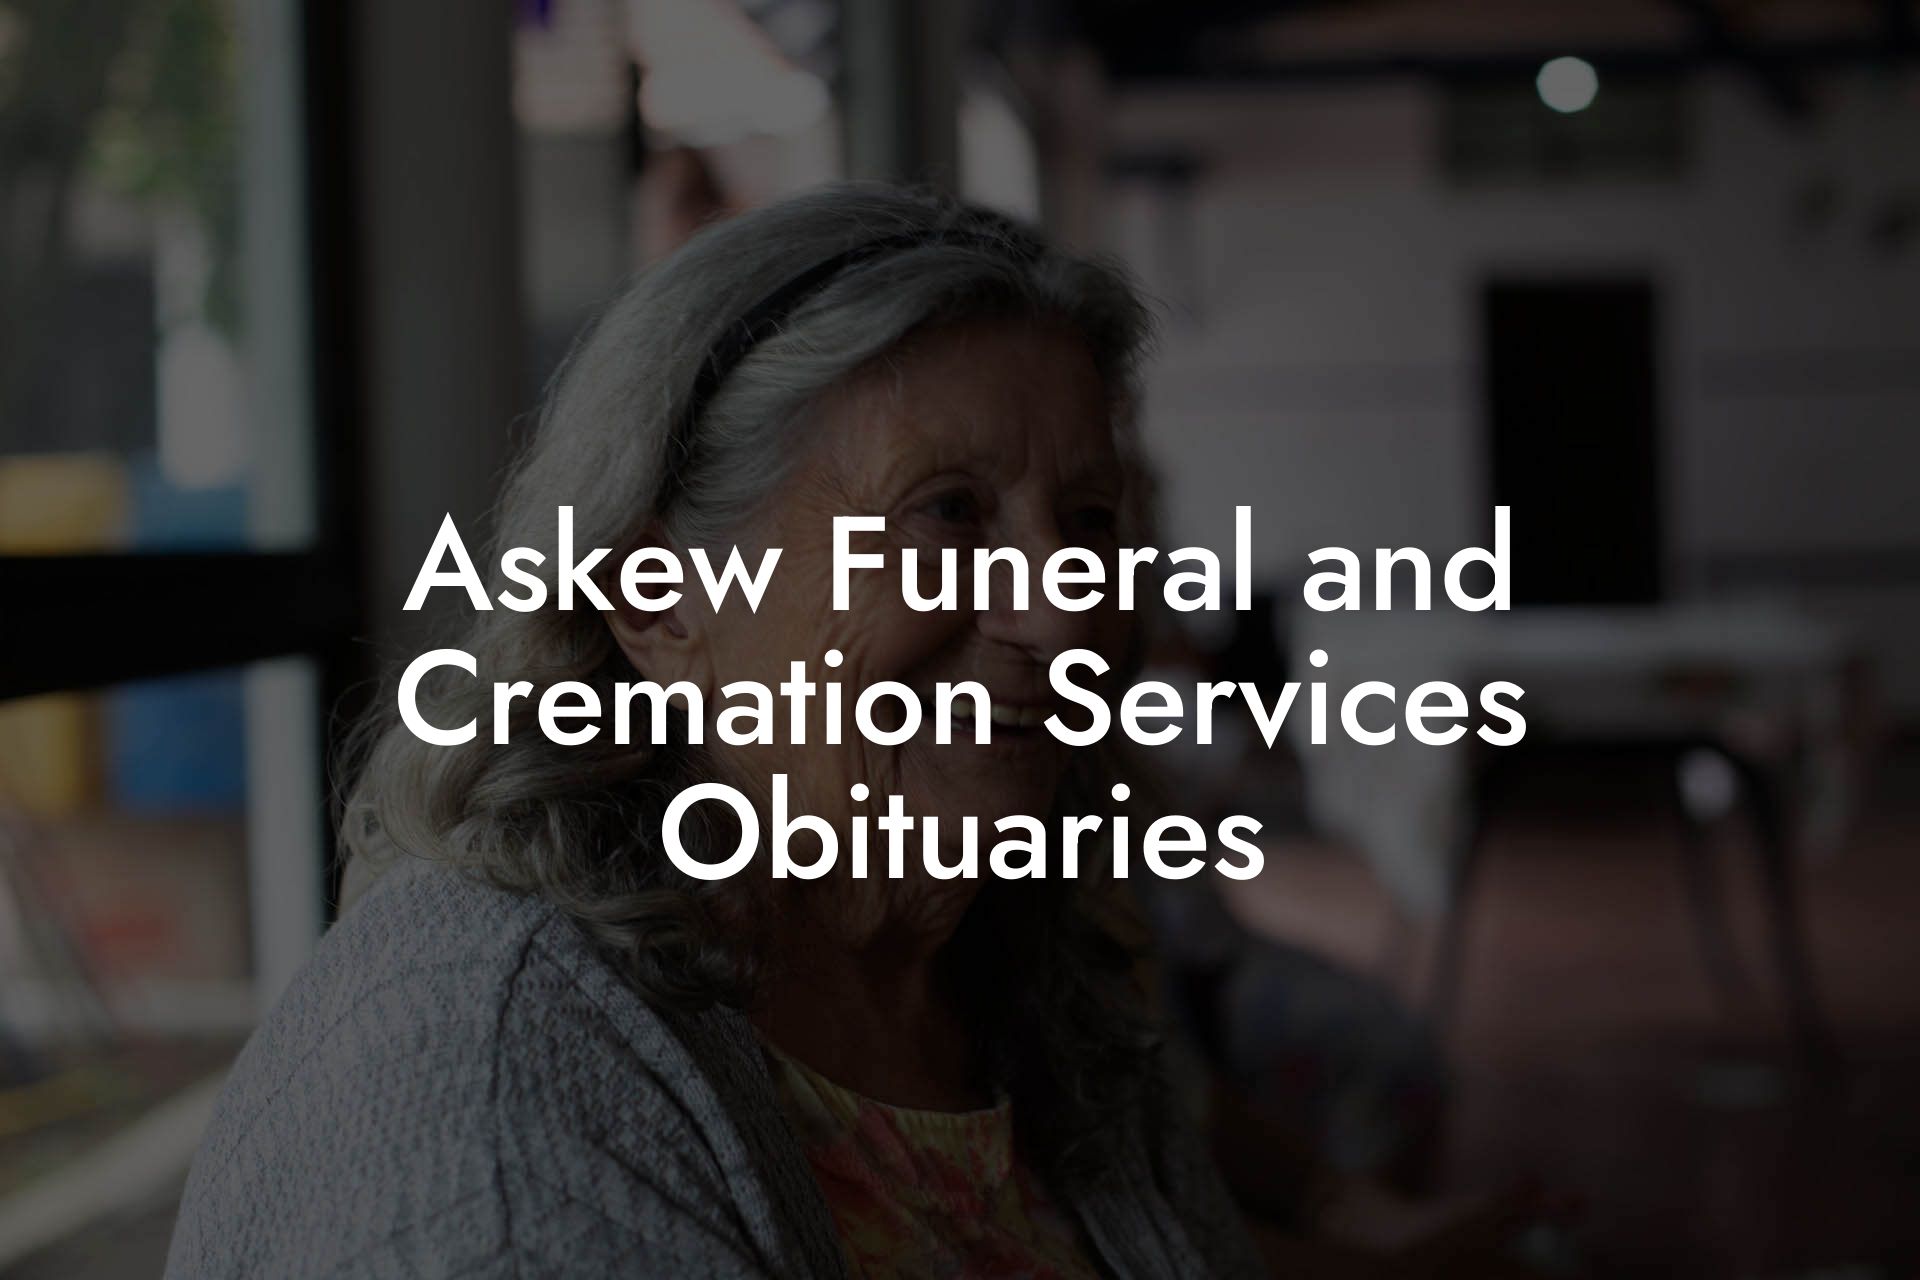 Askew Funeral and Cremation Services Obituaries